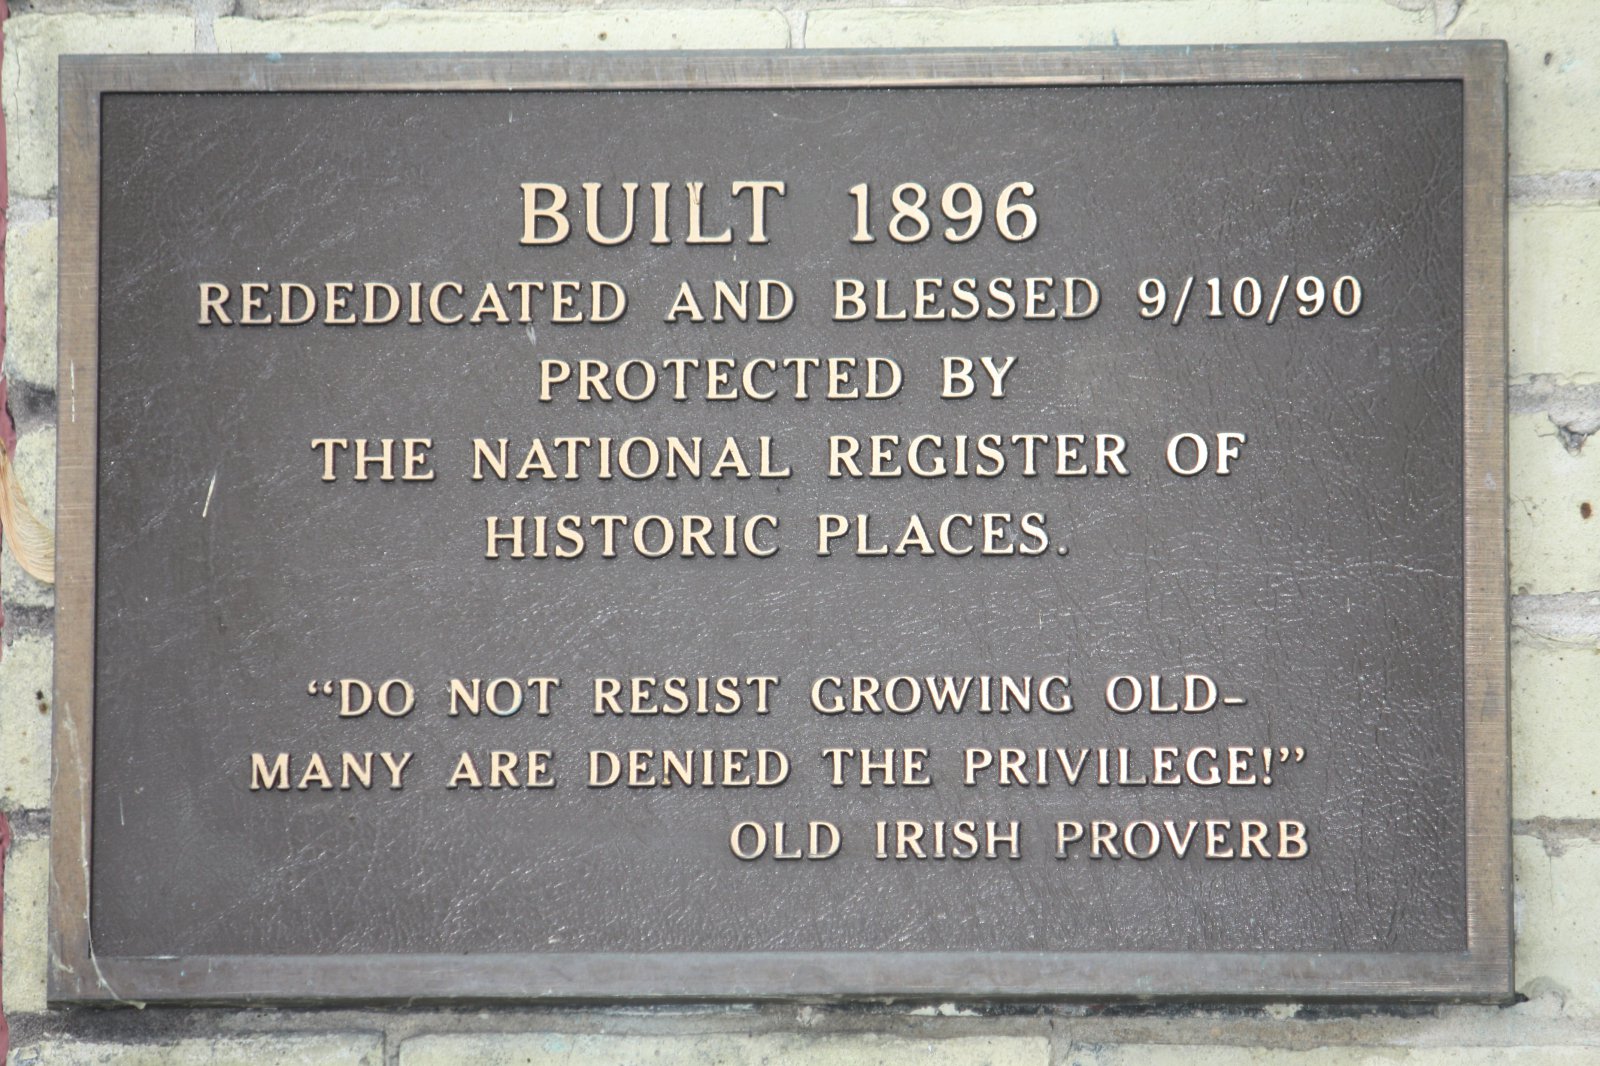 819 N. Cass St. marker. Do not resist growing old many are denied the privilege